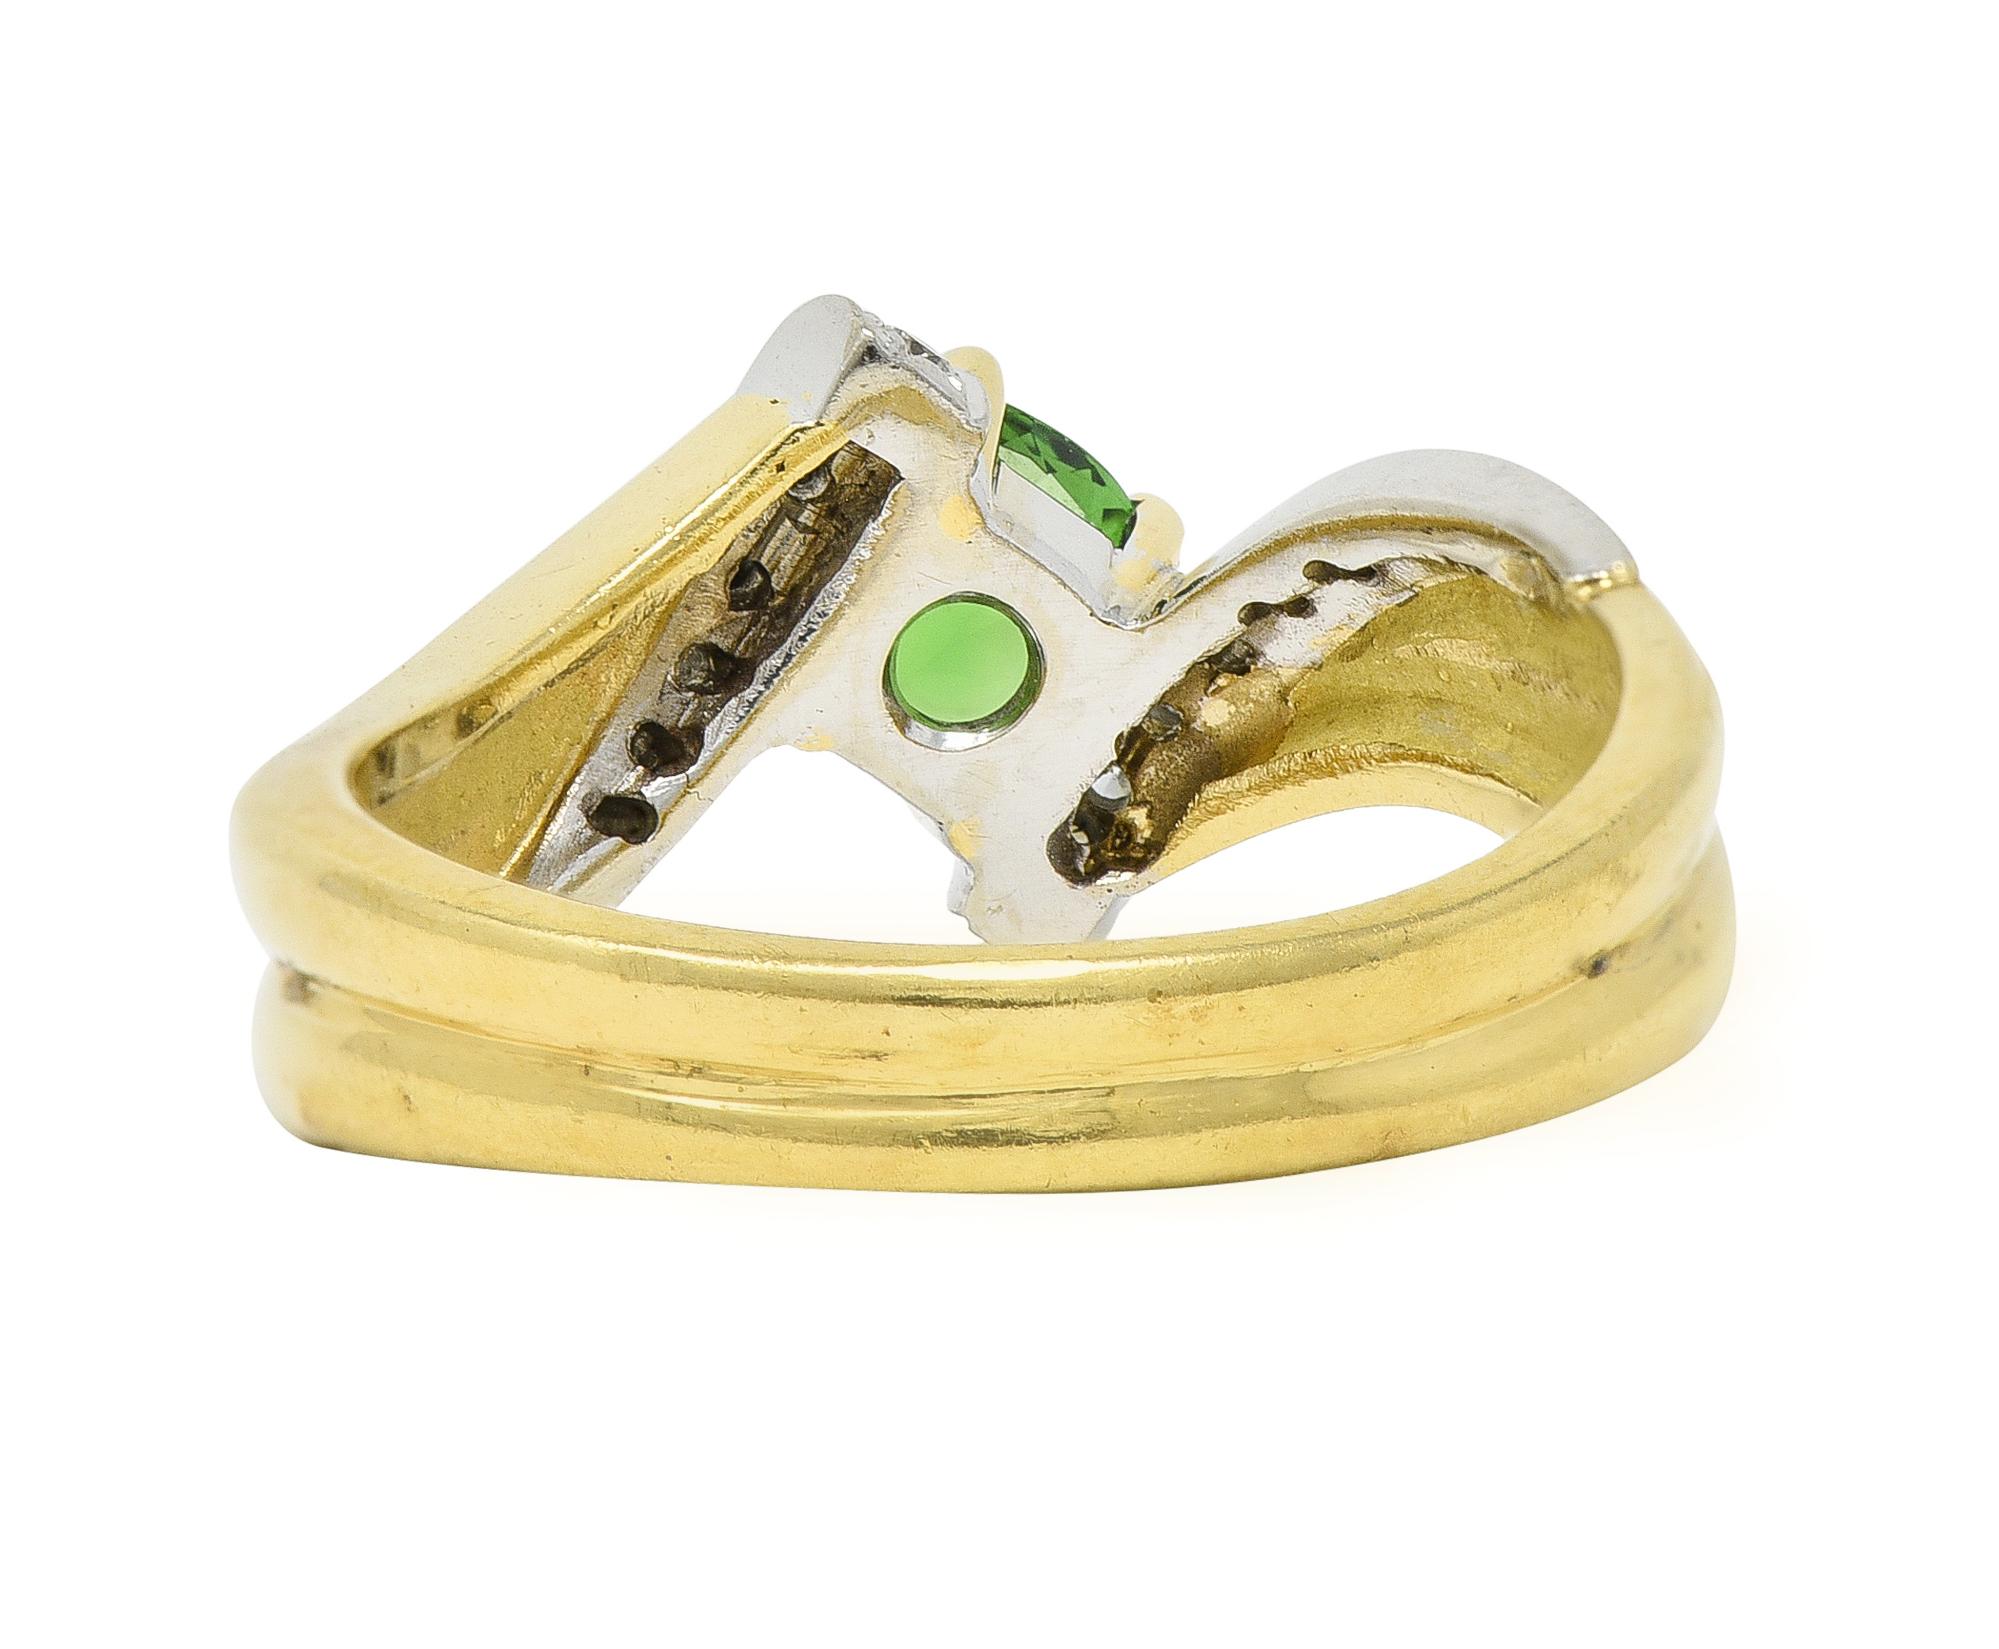 1980s 1.65 CTW Tsavorite Garnet Diamond 18 Karat Two-Tone Gold Bypass Ring In Excellent Condition For Sale In Philadelphia, PA